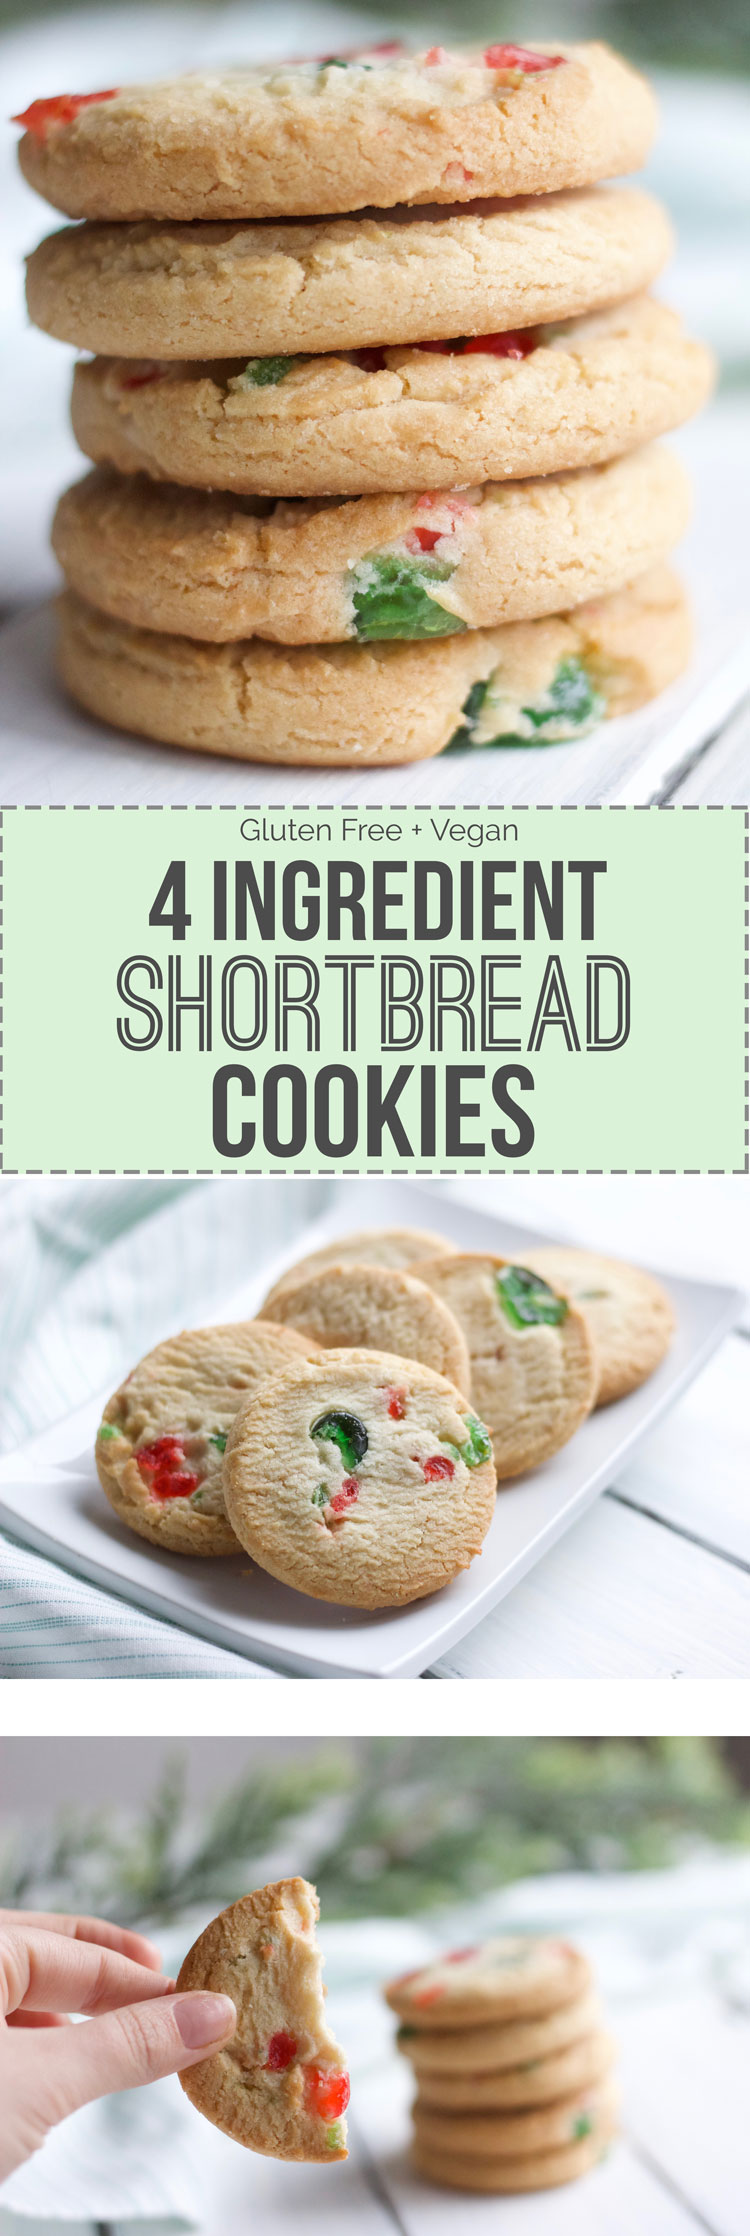 4 Ingredient Gluten Free Shortbread Cookies || Easy, delicious and healthy Christmas cookie for all members of the family!